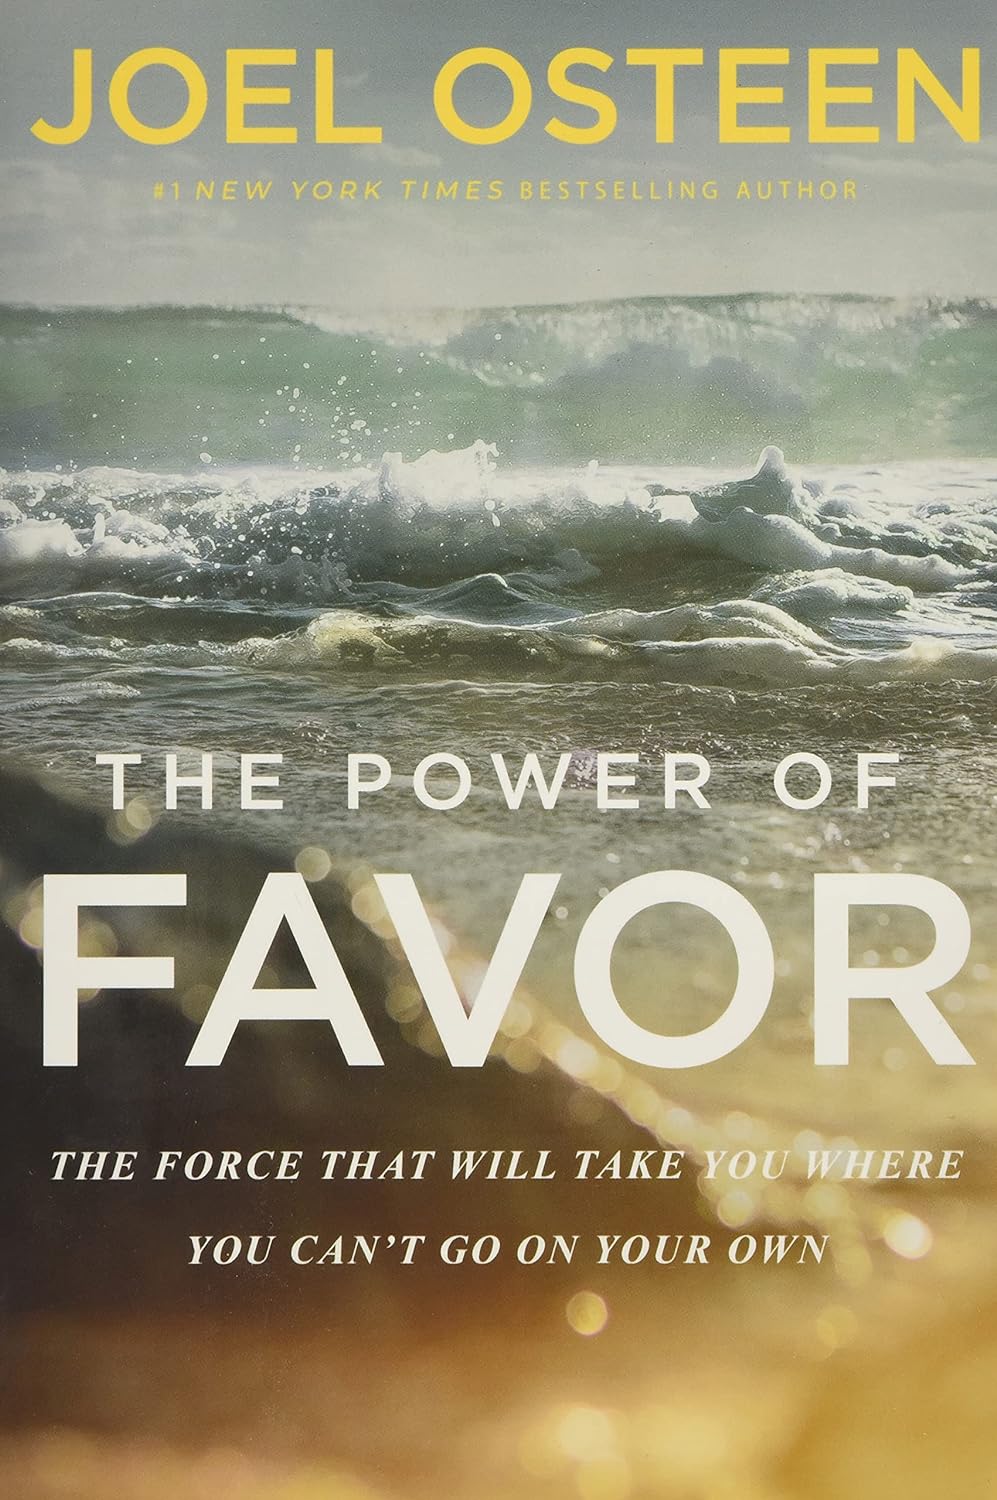 The Power of Favor: The Force That Will Take You Where You Can't Go on Your Own: Unleashing the Force That Will Take You Where Y